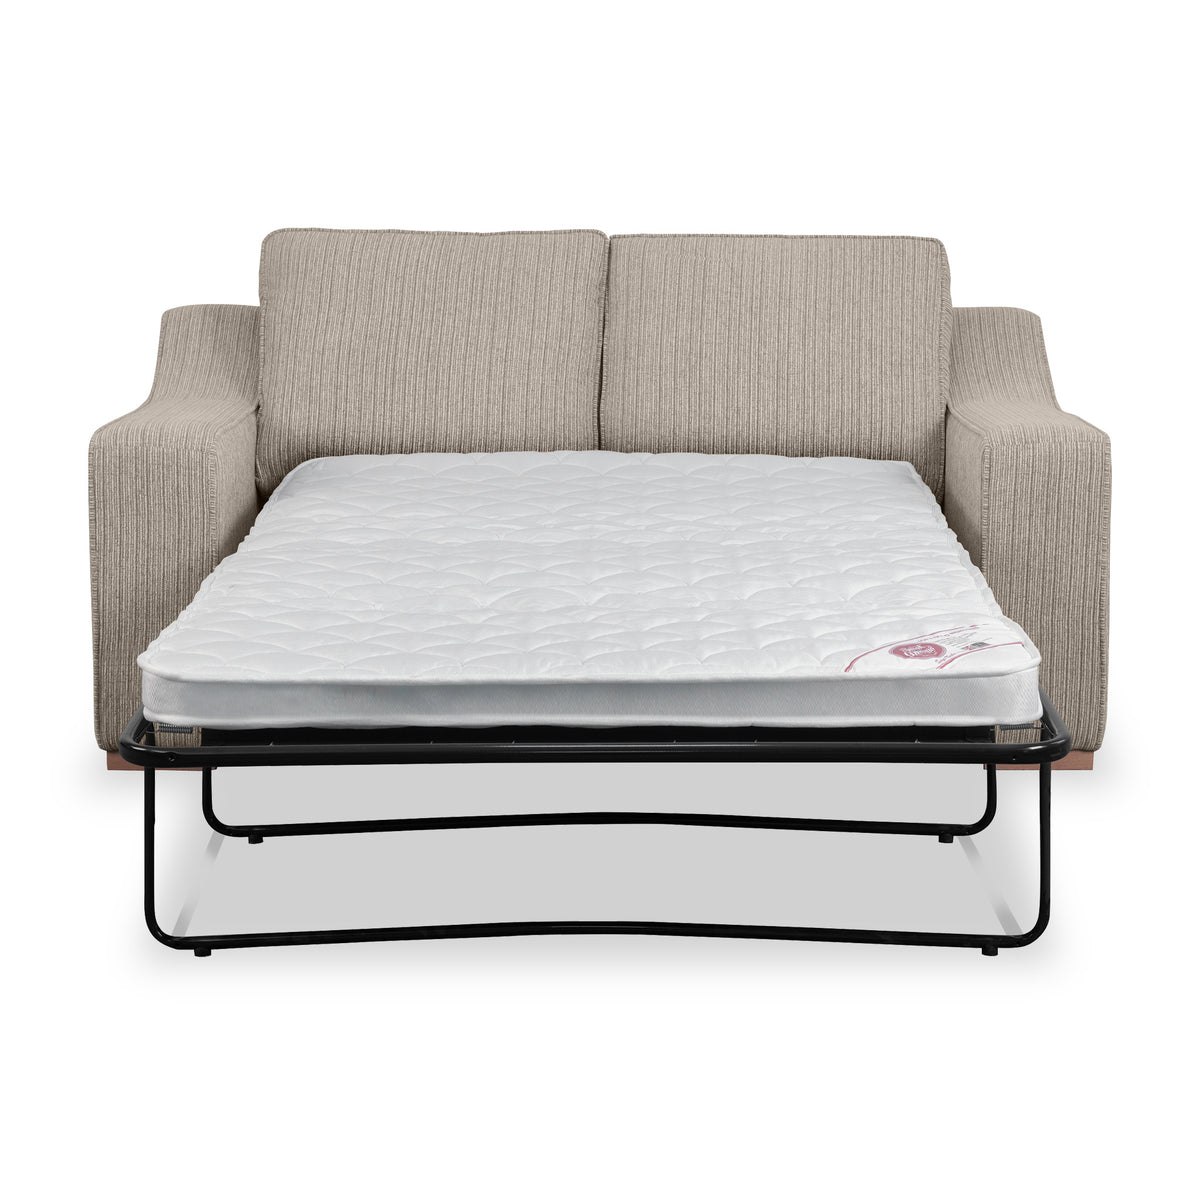 Ashow Beige 2 Seater Sofabed with mattress